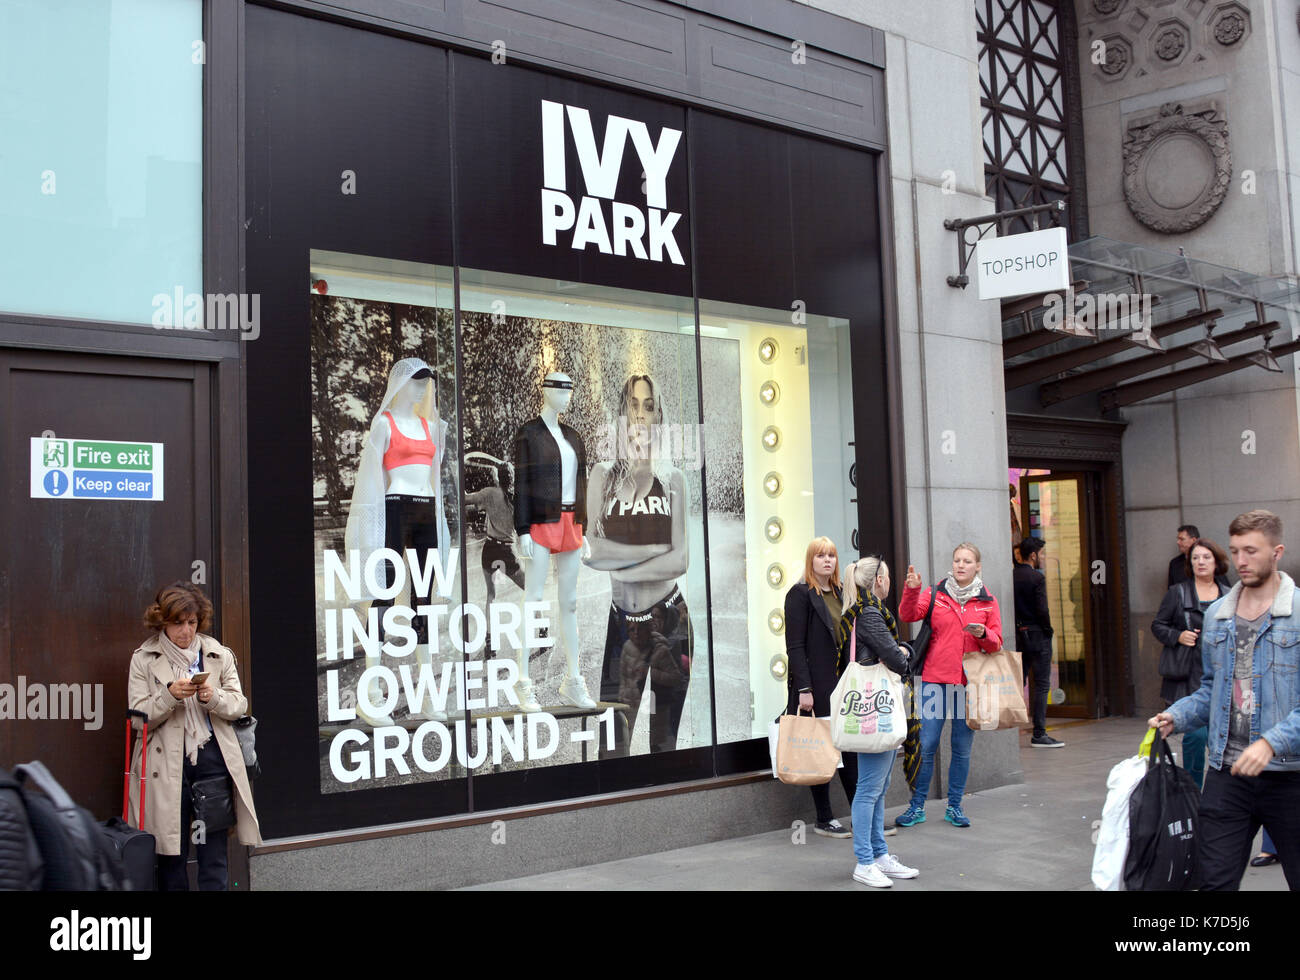 Photo Must Be Credited ©Alpha Press 066465 25/05/2016 Beyonce's Clothing  Range IVY Park Window Display at Topshop Store on Oxford Street in London  Stock Photo - Alamy